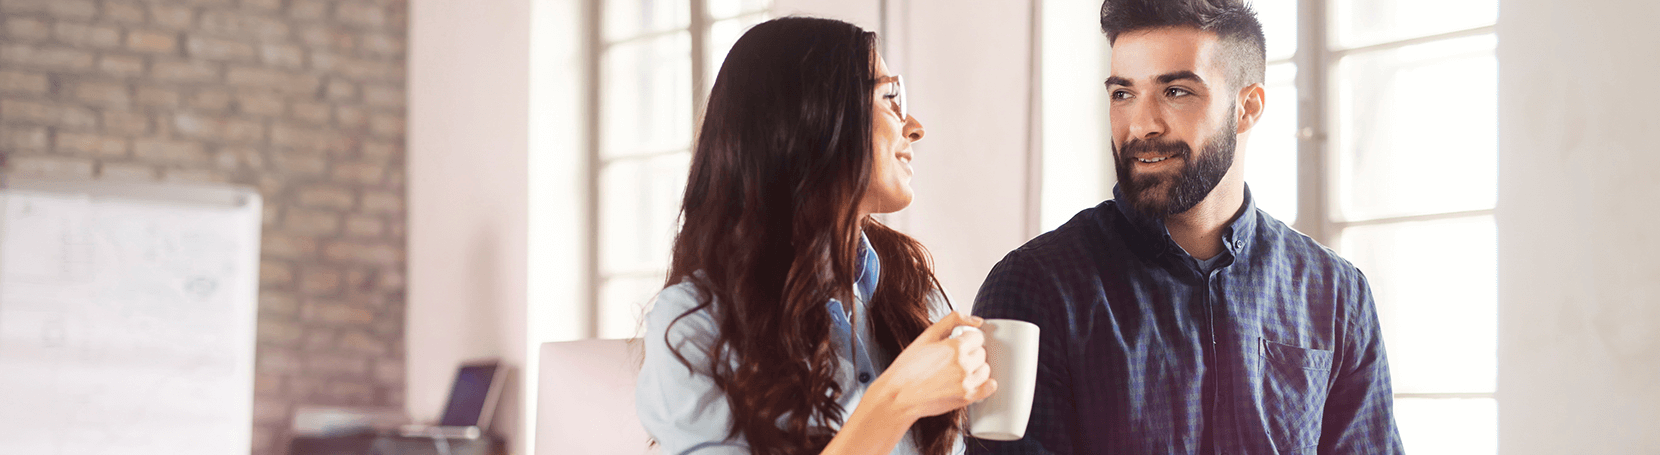 Young couple having a discussion over coffee